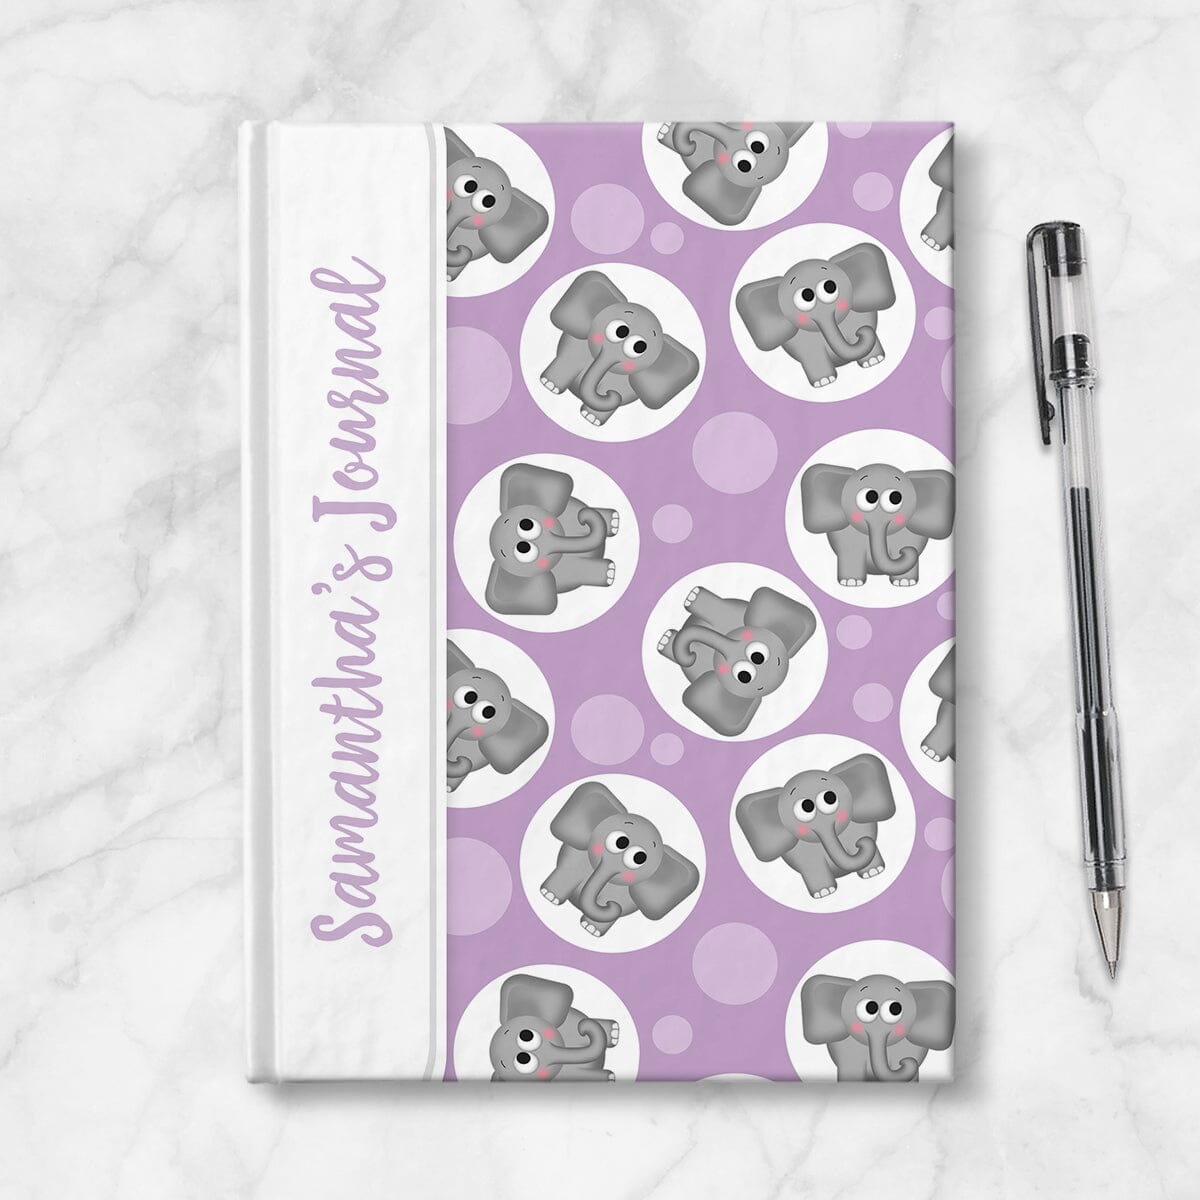 Personalized Cute Purple Elephant Journal at Artistically Invited. Image shows the book on a countertop next to a pen.